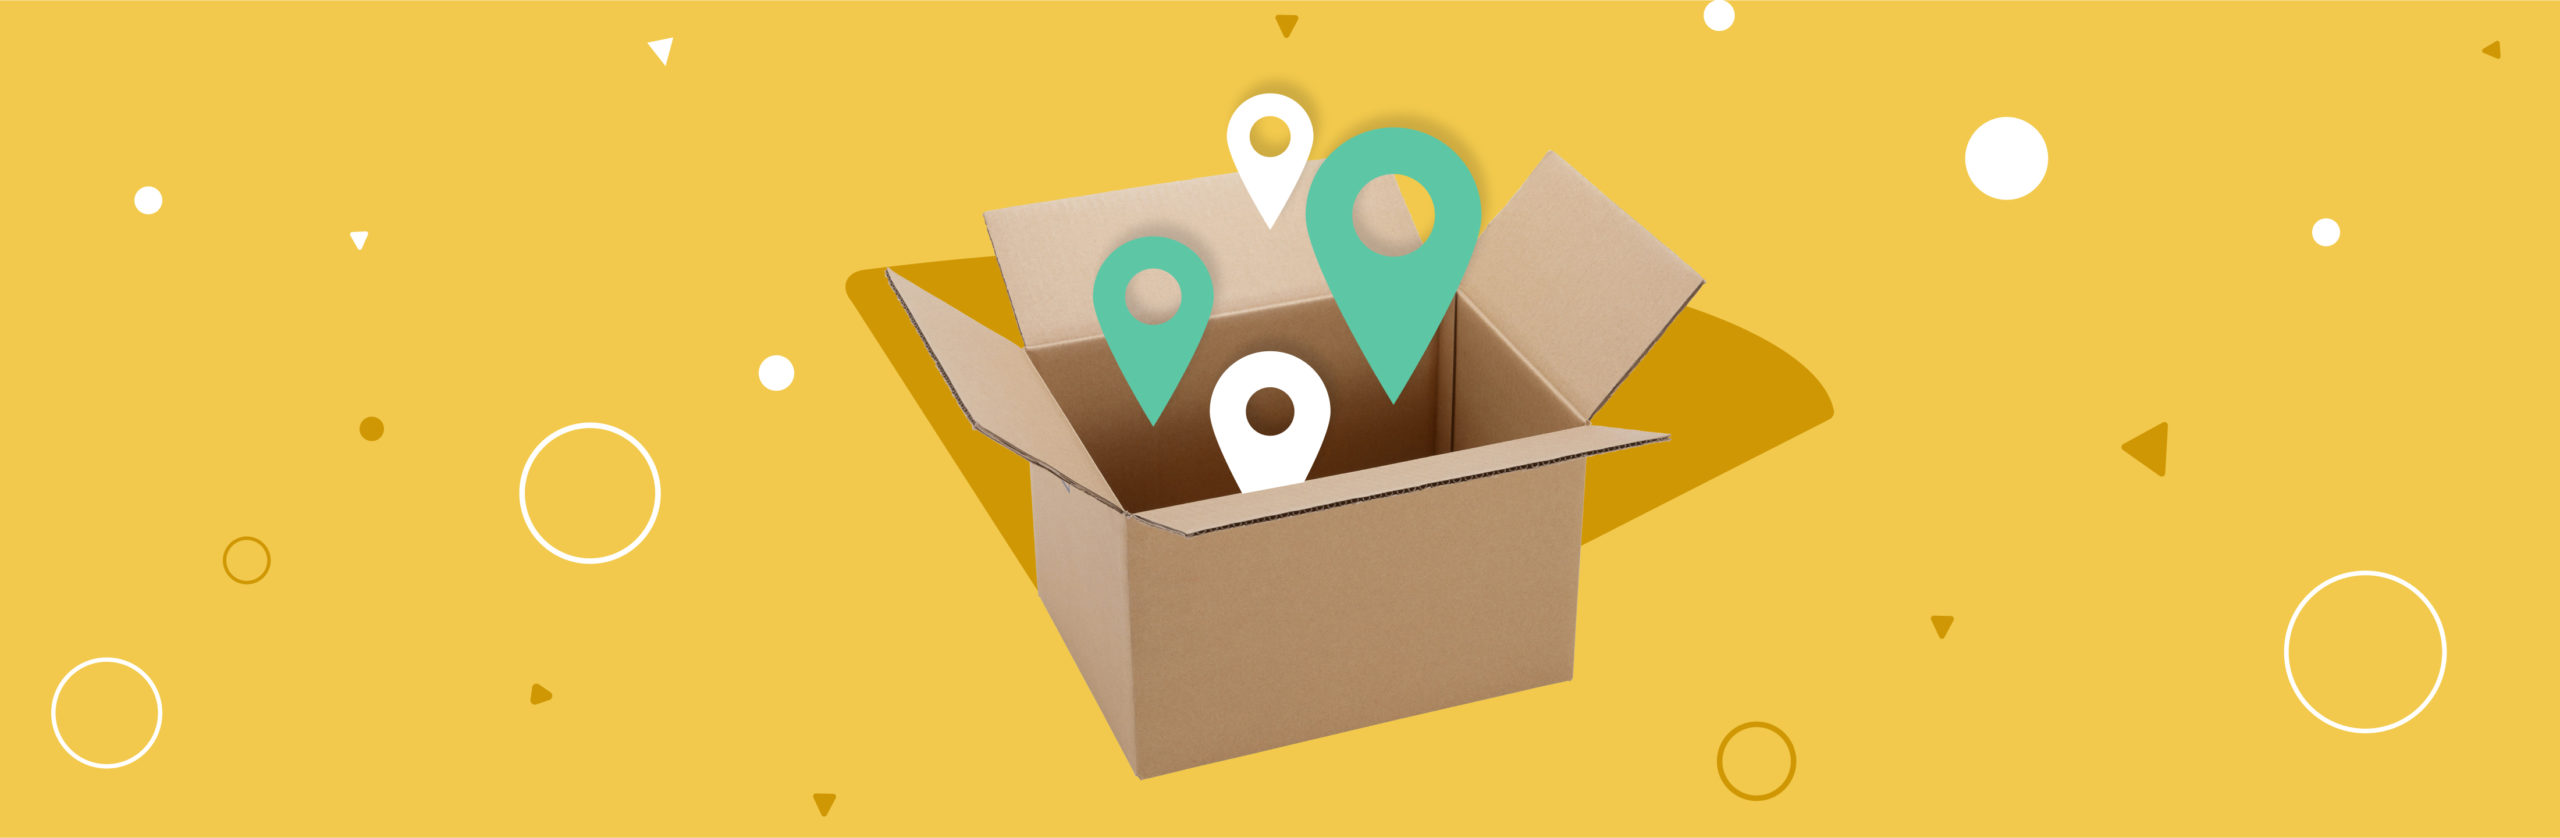 What to Consider When Building the Backend for a Location-Based Service